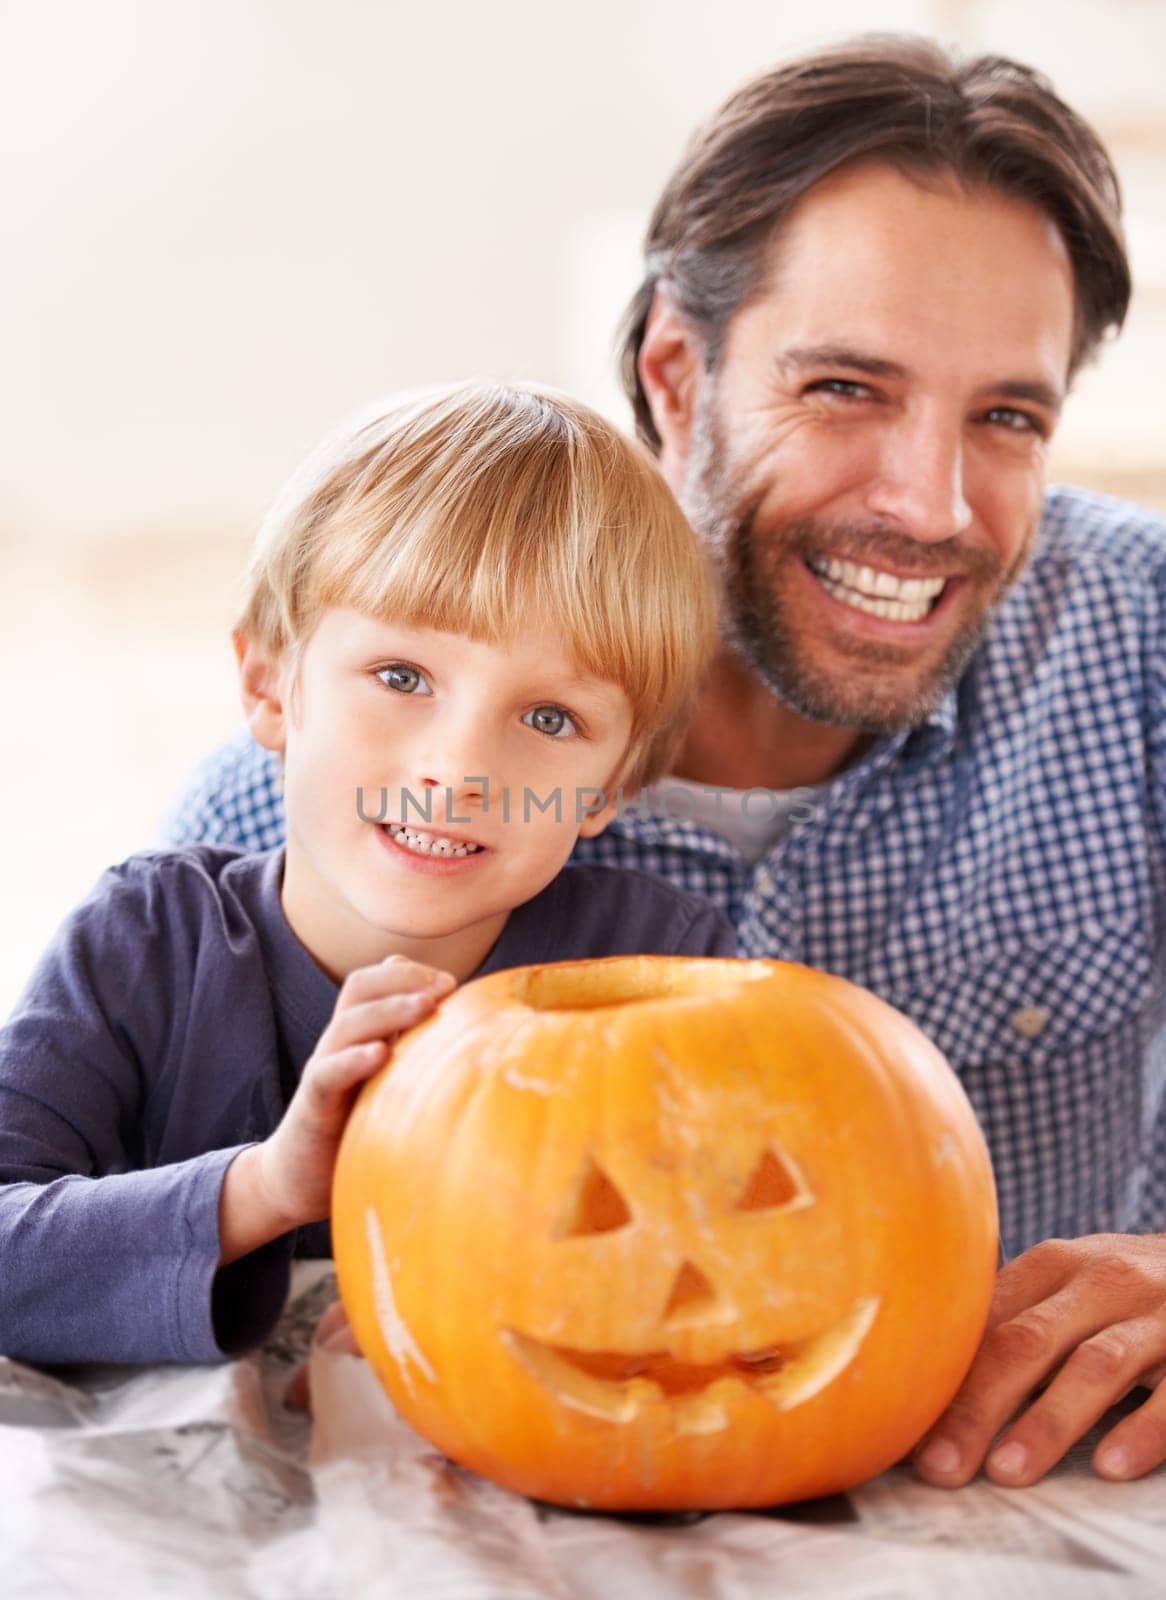 Father, portrait and kid with pumpkin to celebrate halloween, fun craft and creativity at home. Happy boy child, dad and family carving face in orange vegetable, holiday lantern and party decoration.